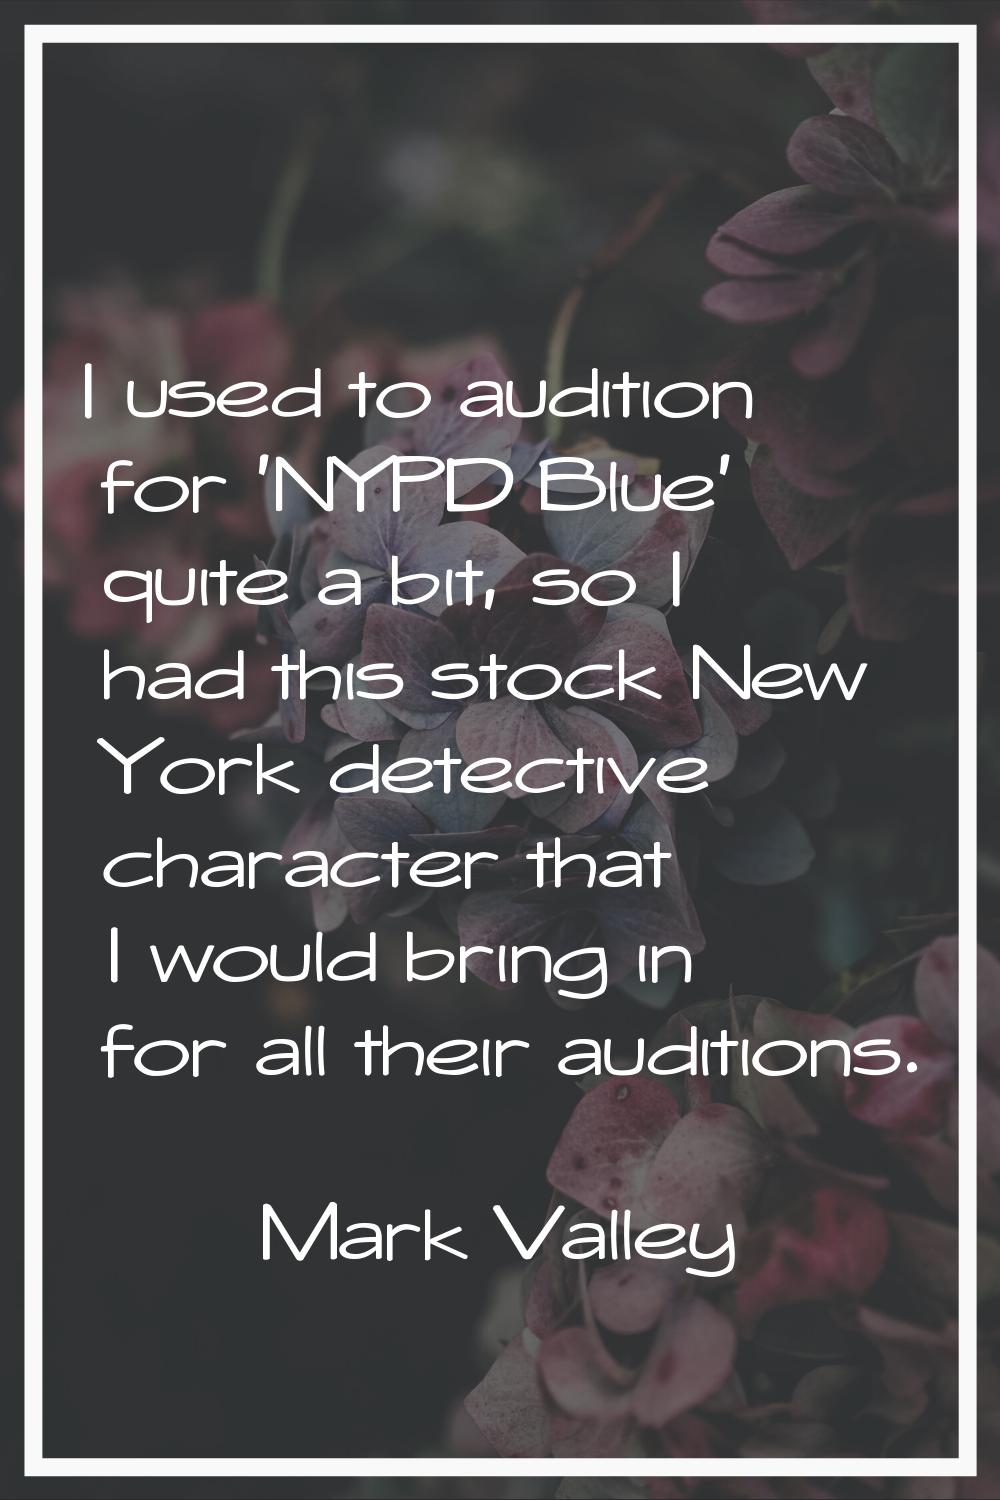 I used to audition for 'NYPD Blue' quite a bit, so I had this stock New York detective character th